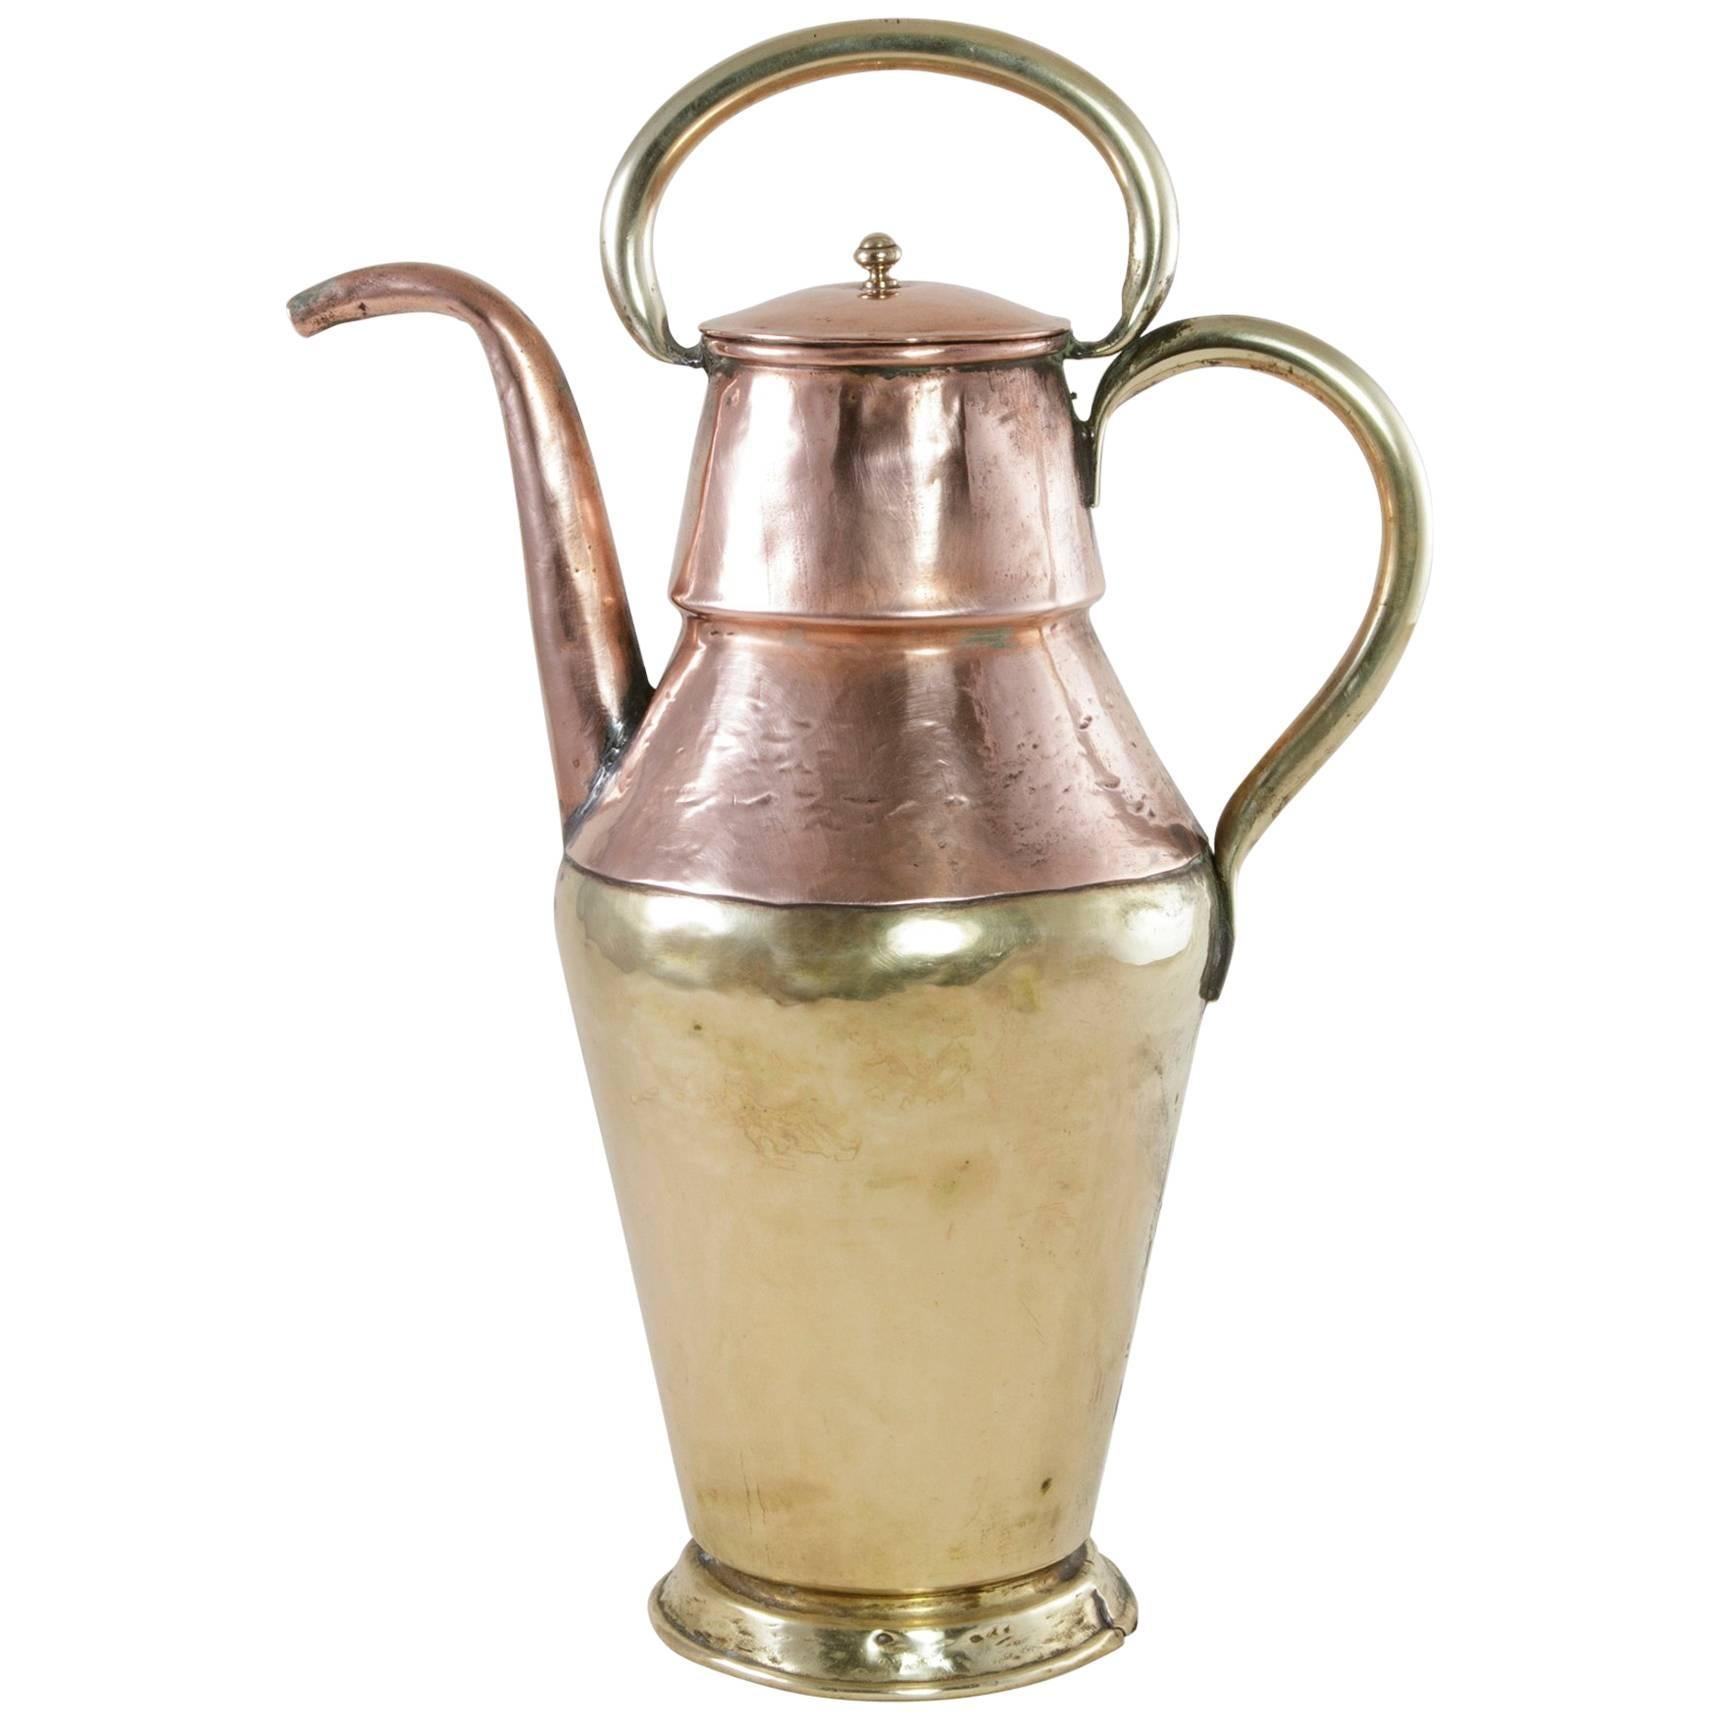 Early 19th Century Hand-Hammered French Copper and Brass Teapot with Lid